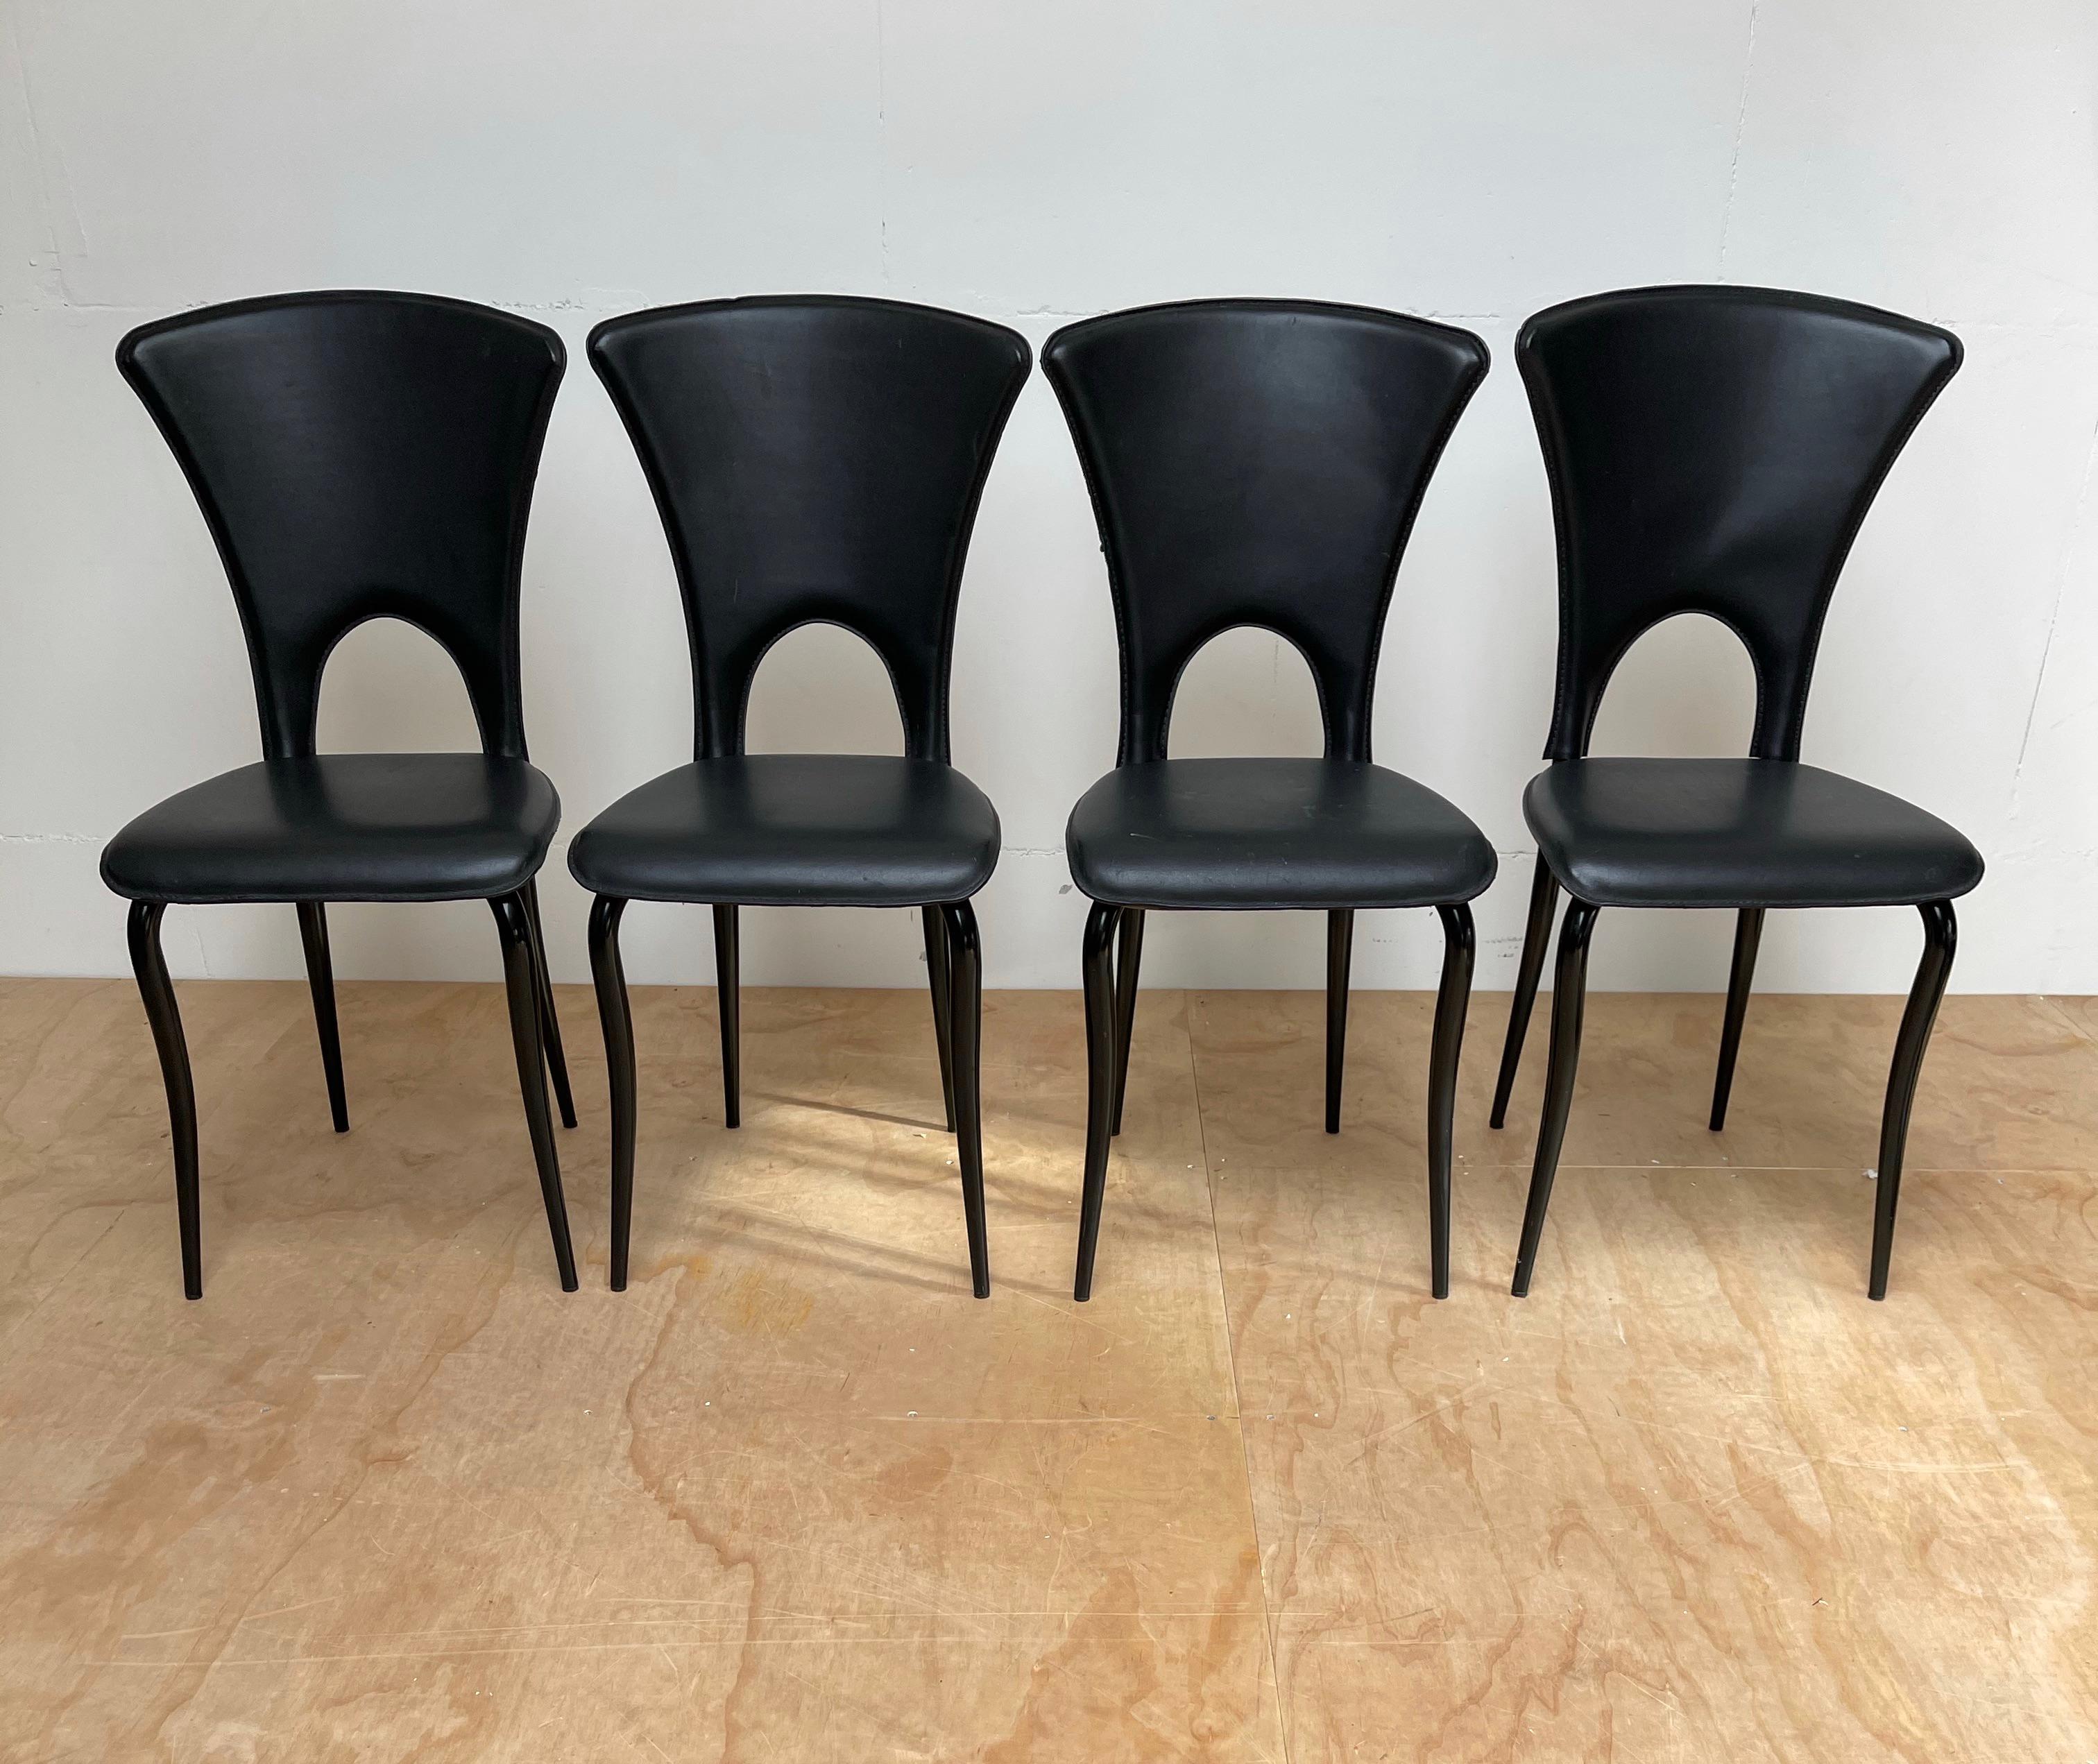 Rare and completely original set of four stylish dining chairs.

This beautiful set of very stylish chairs is another one of our recent great finds. The flowing lines in the design combined with the materials make this sleek set of dining chairs